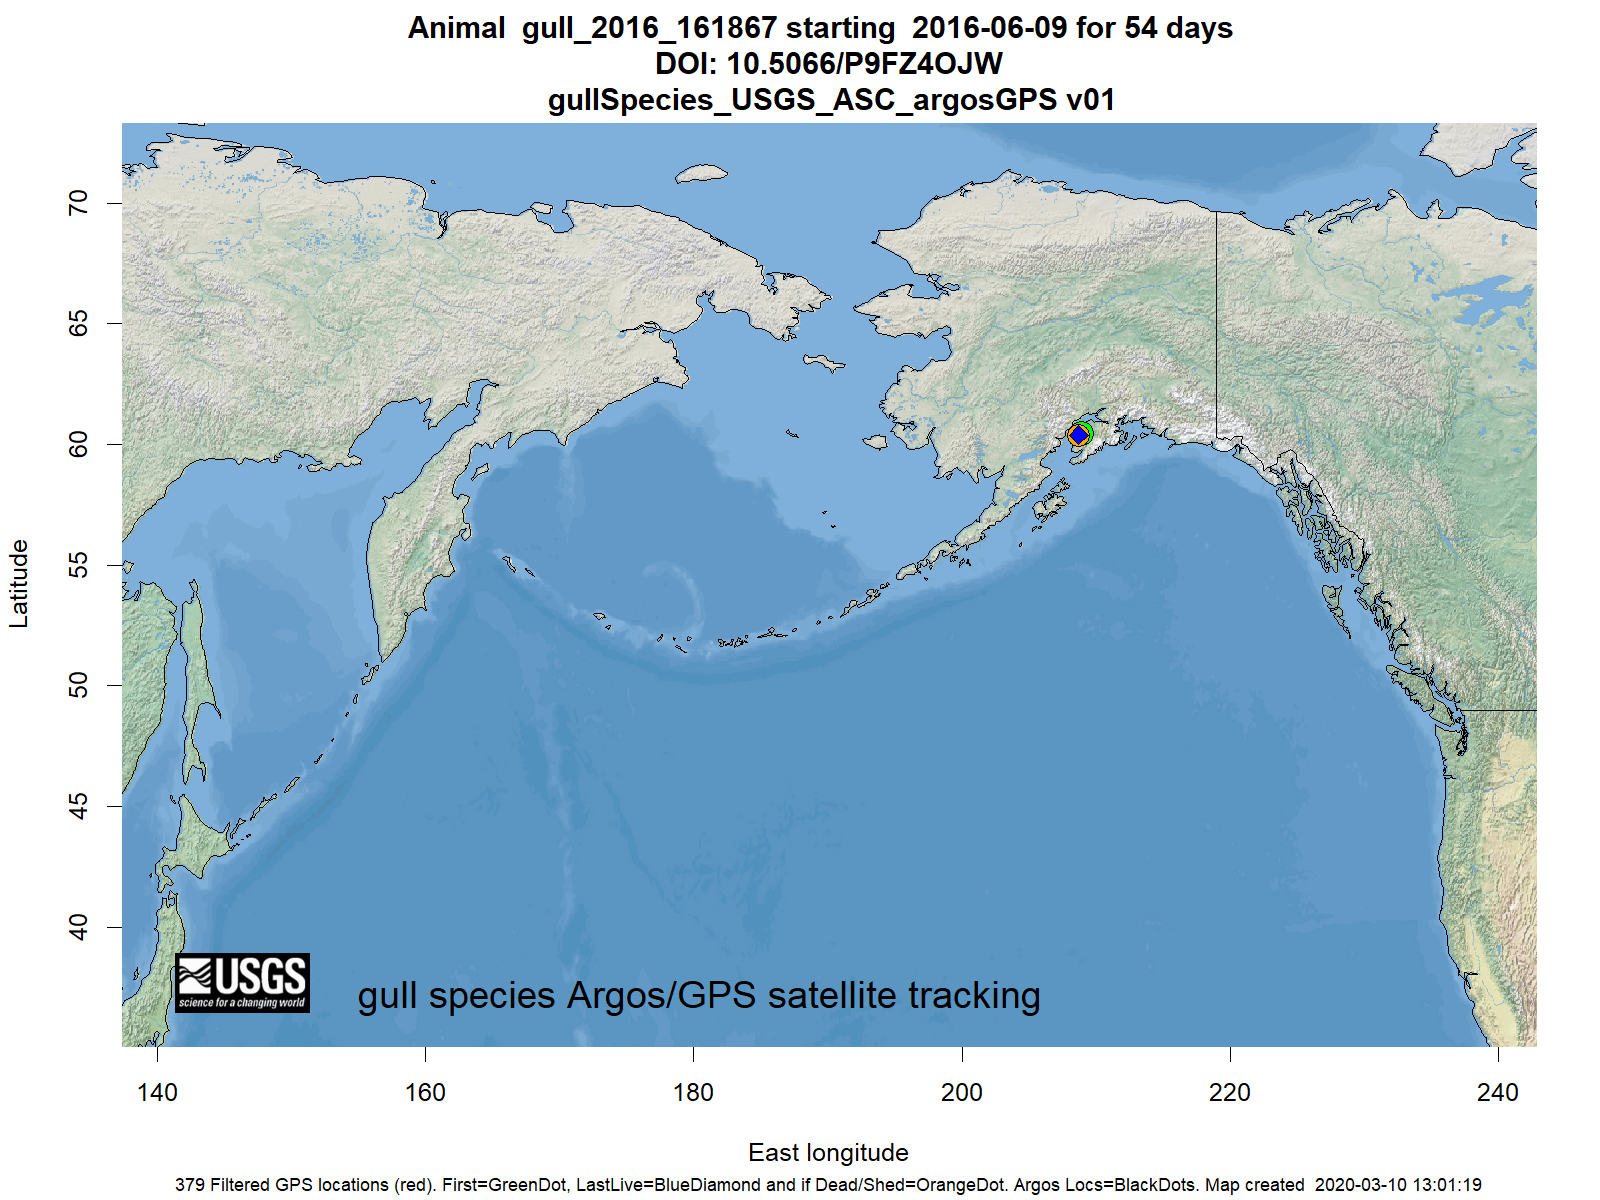 Tracking map for species gull_2016_161867